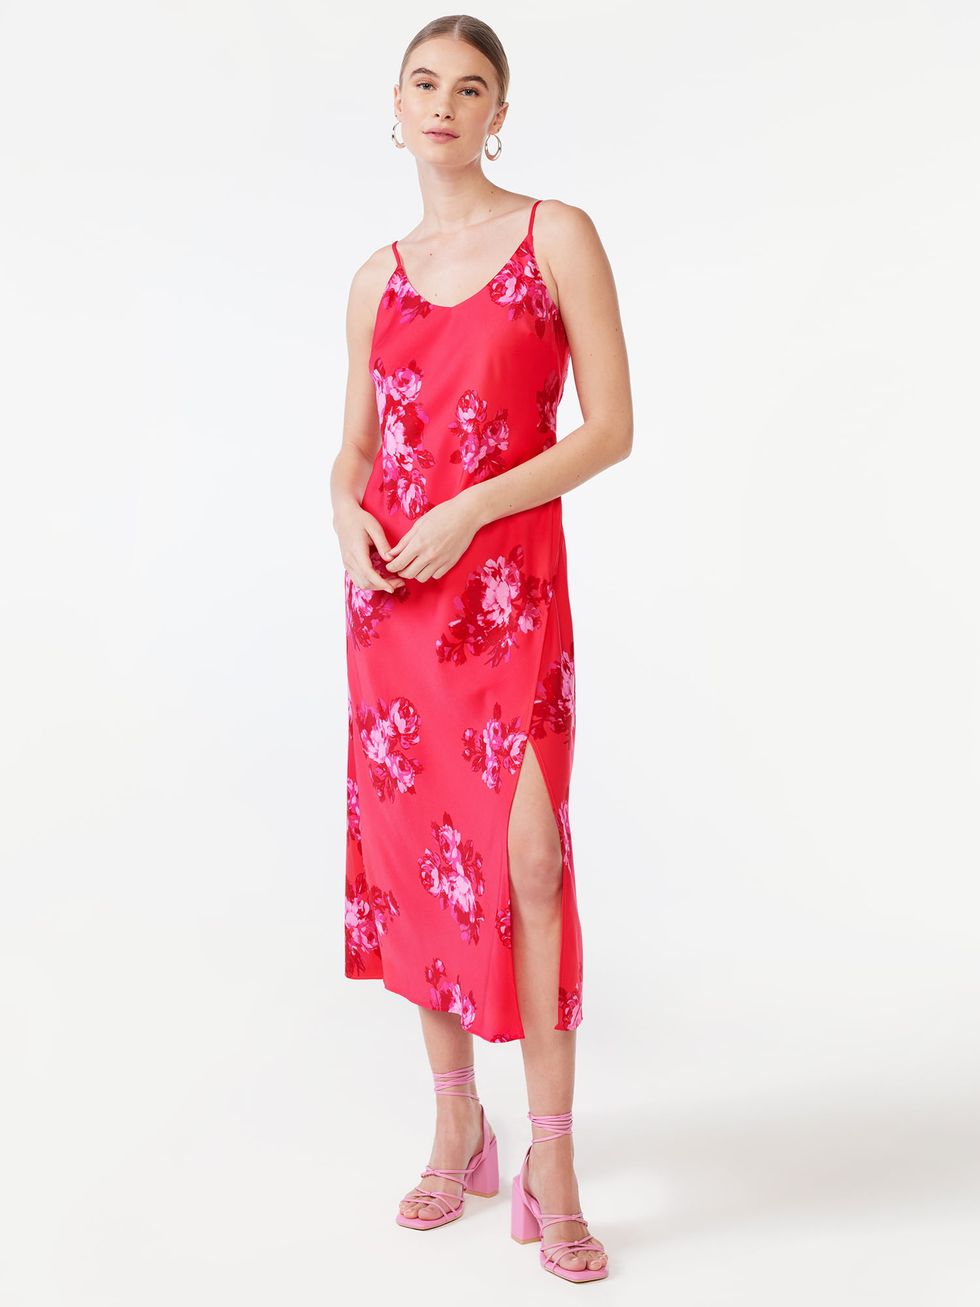 Zara's Viral Pink Satin Dress Dupe Is at Target for Half the Price